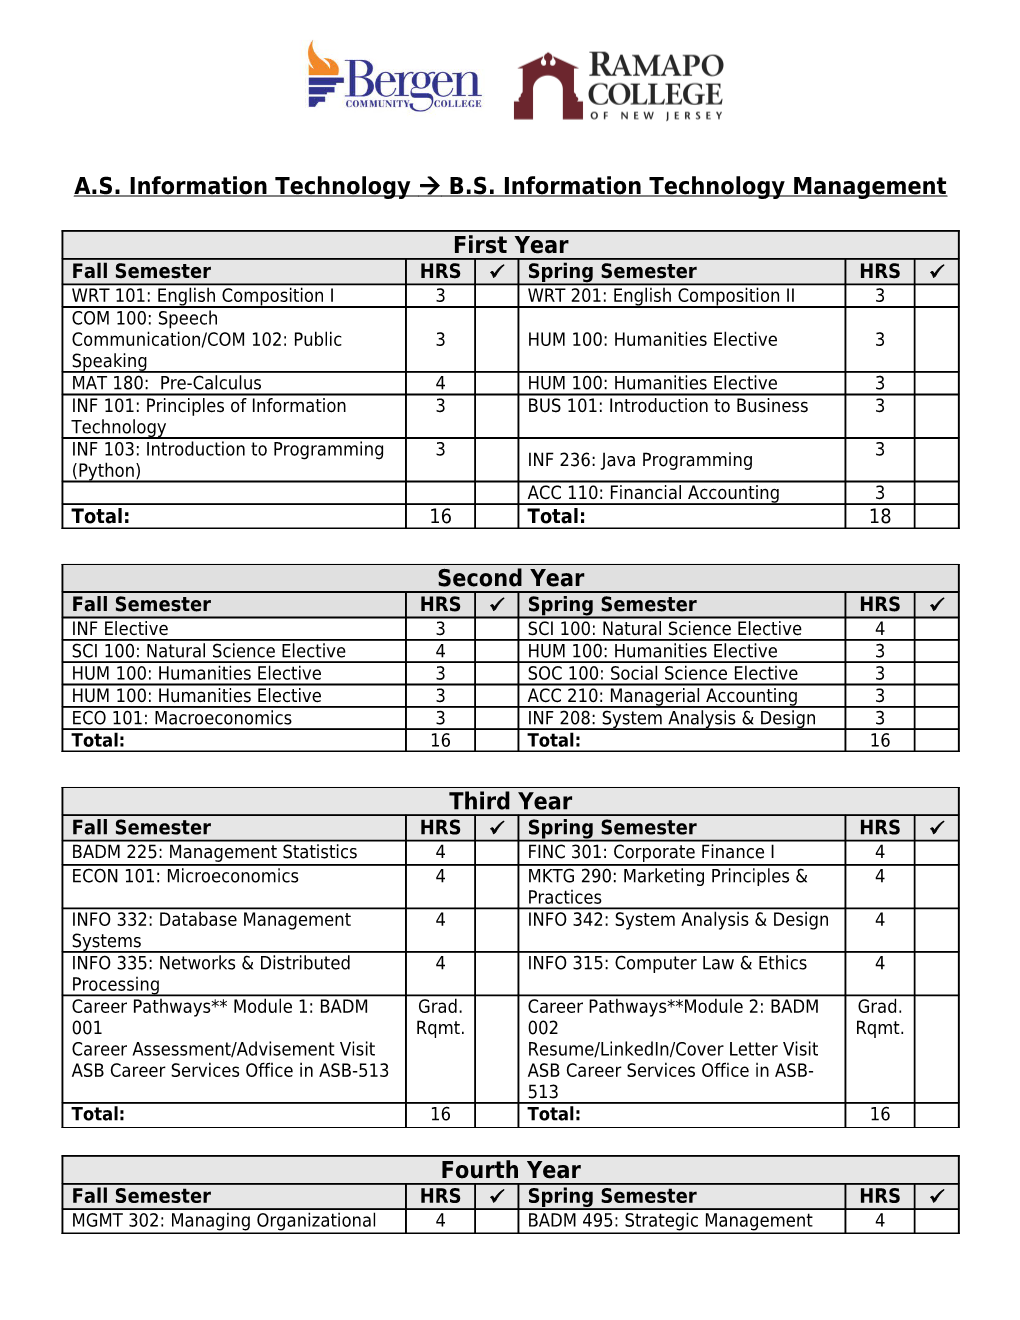 A.S. Information Technology B.S. Information Technology Management